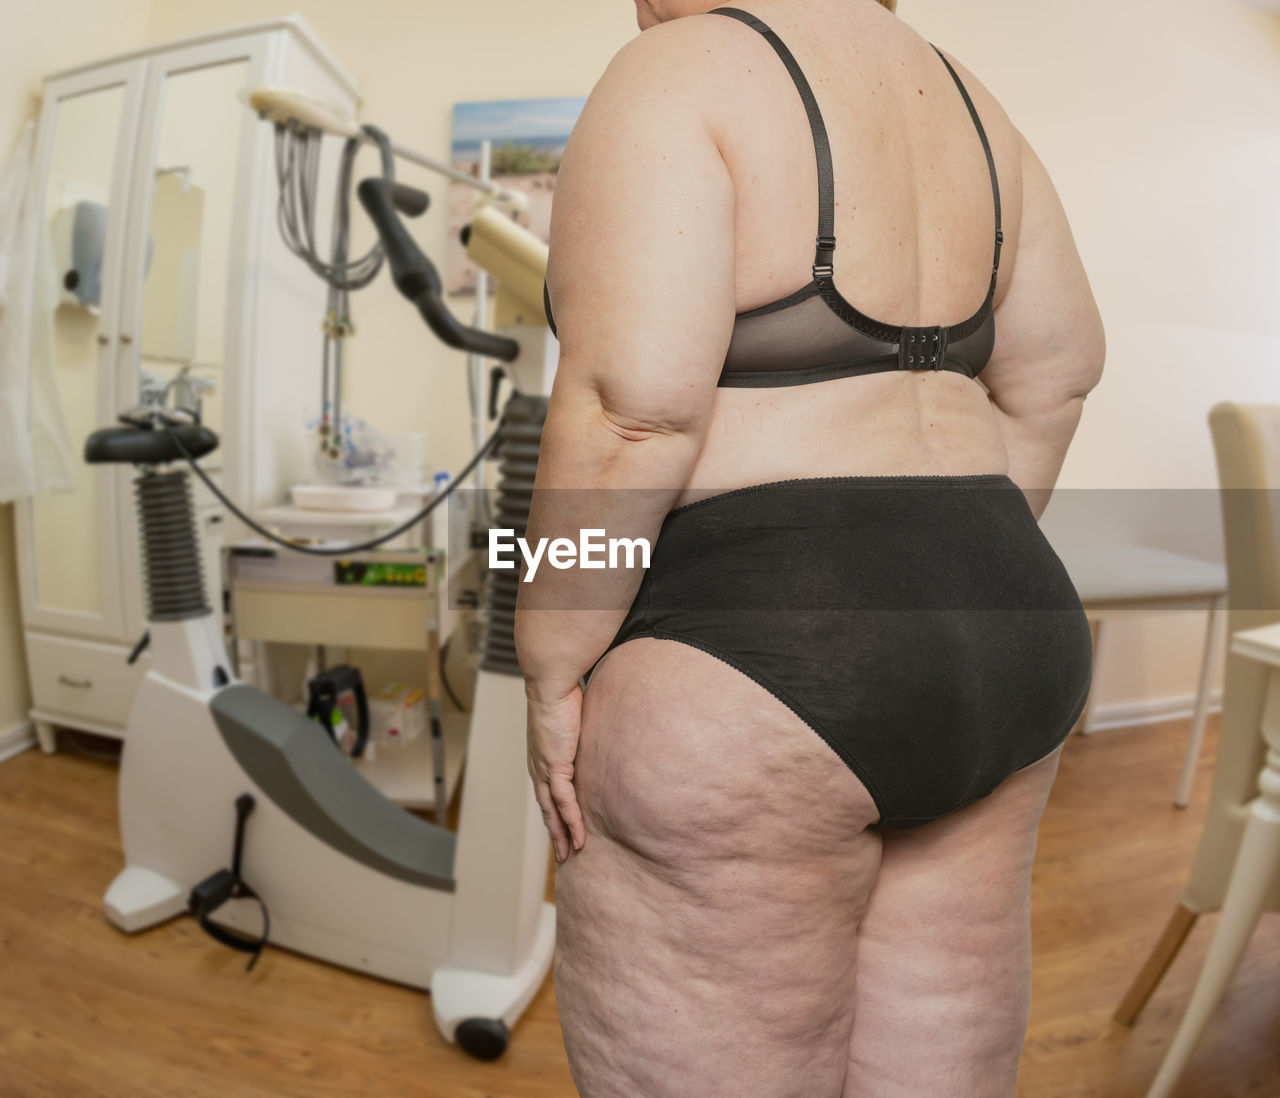 Woman with obesity and cellulite in a treatment room with a doctor